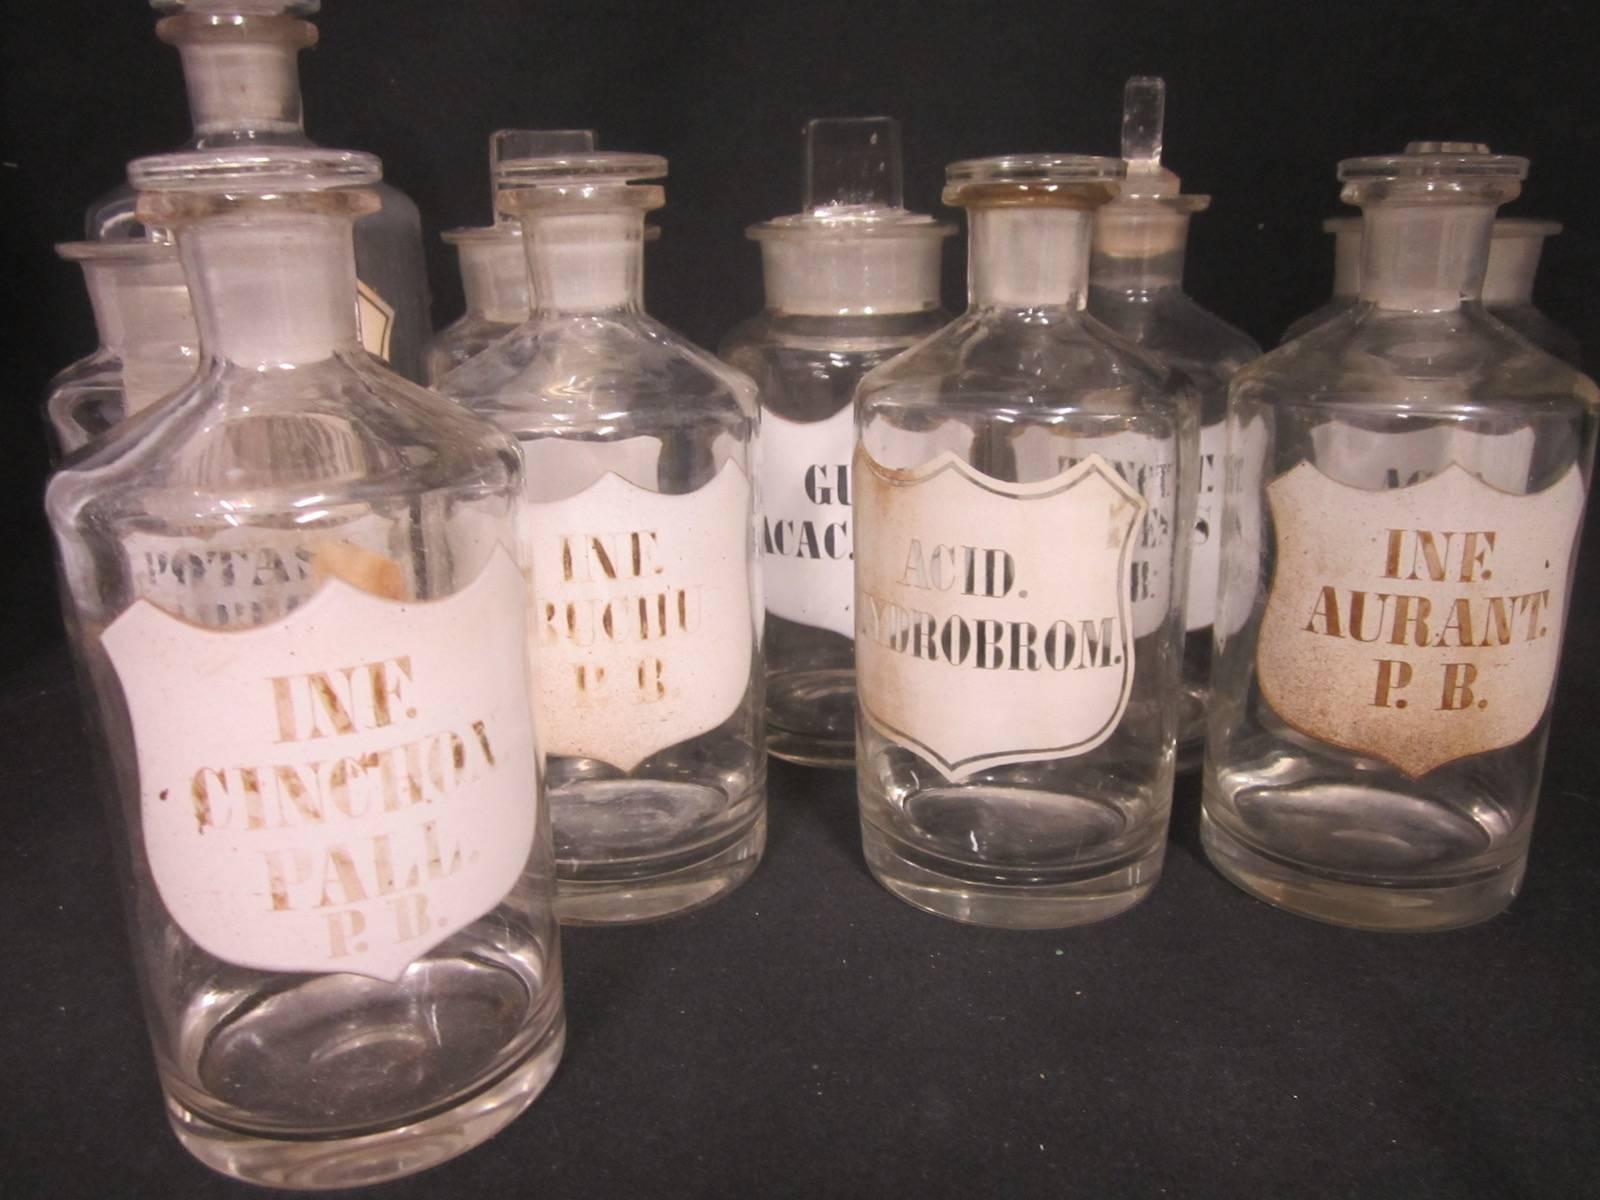 10 x Apothecary bottles, glass stoppers, enamel labels, from a 1950's Brisbane, Australia, pharmacy, 1 A/F Lycopodium has a chipped rim, 
They range from 19-24cm high